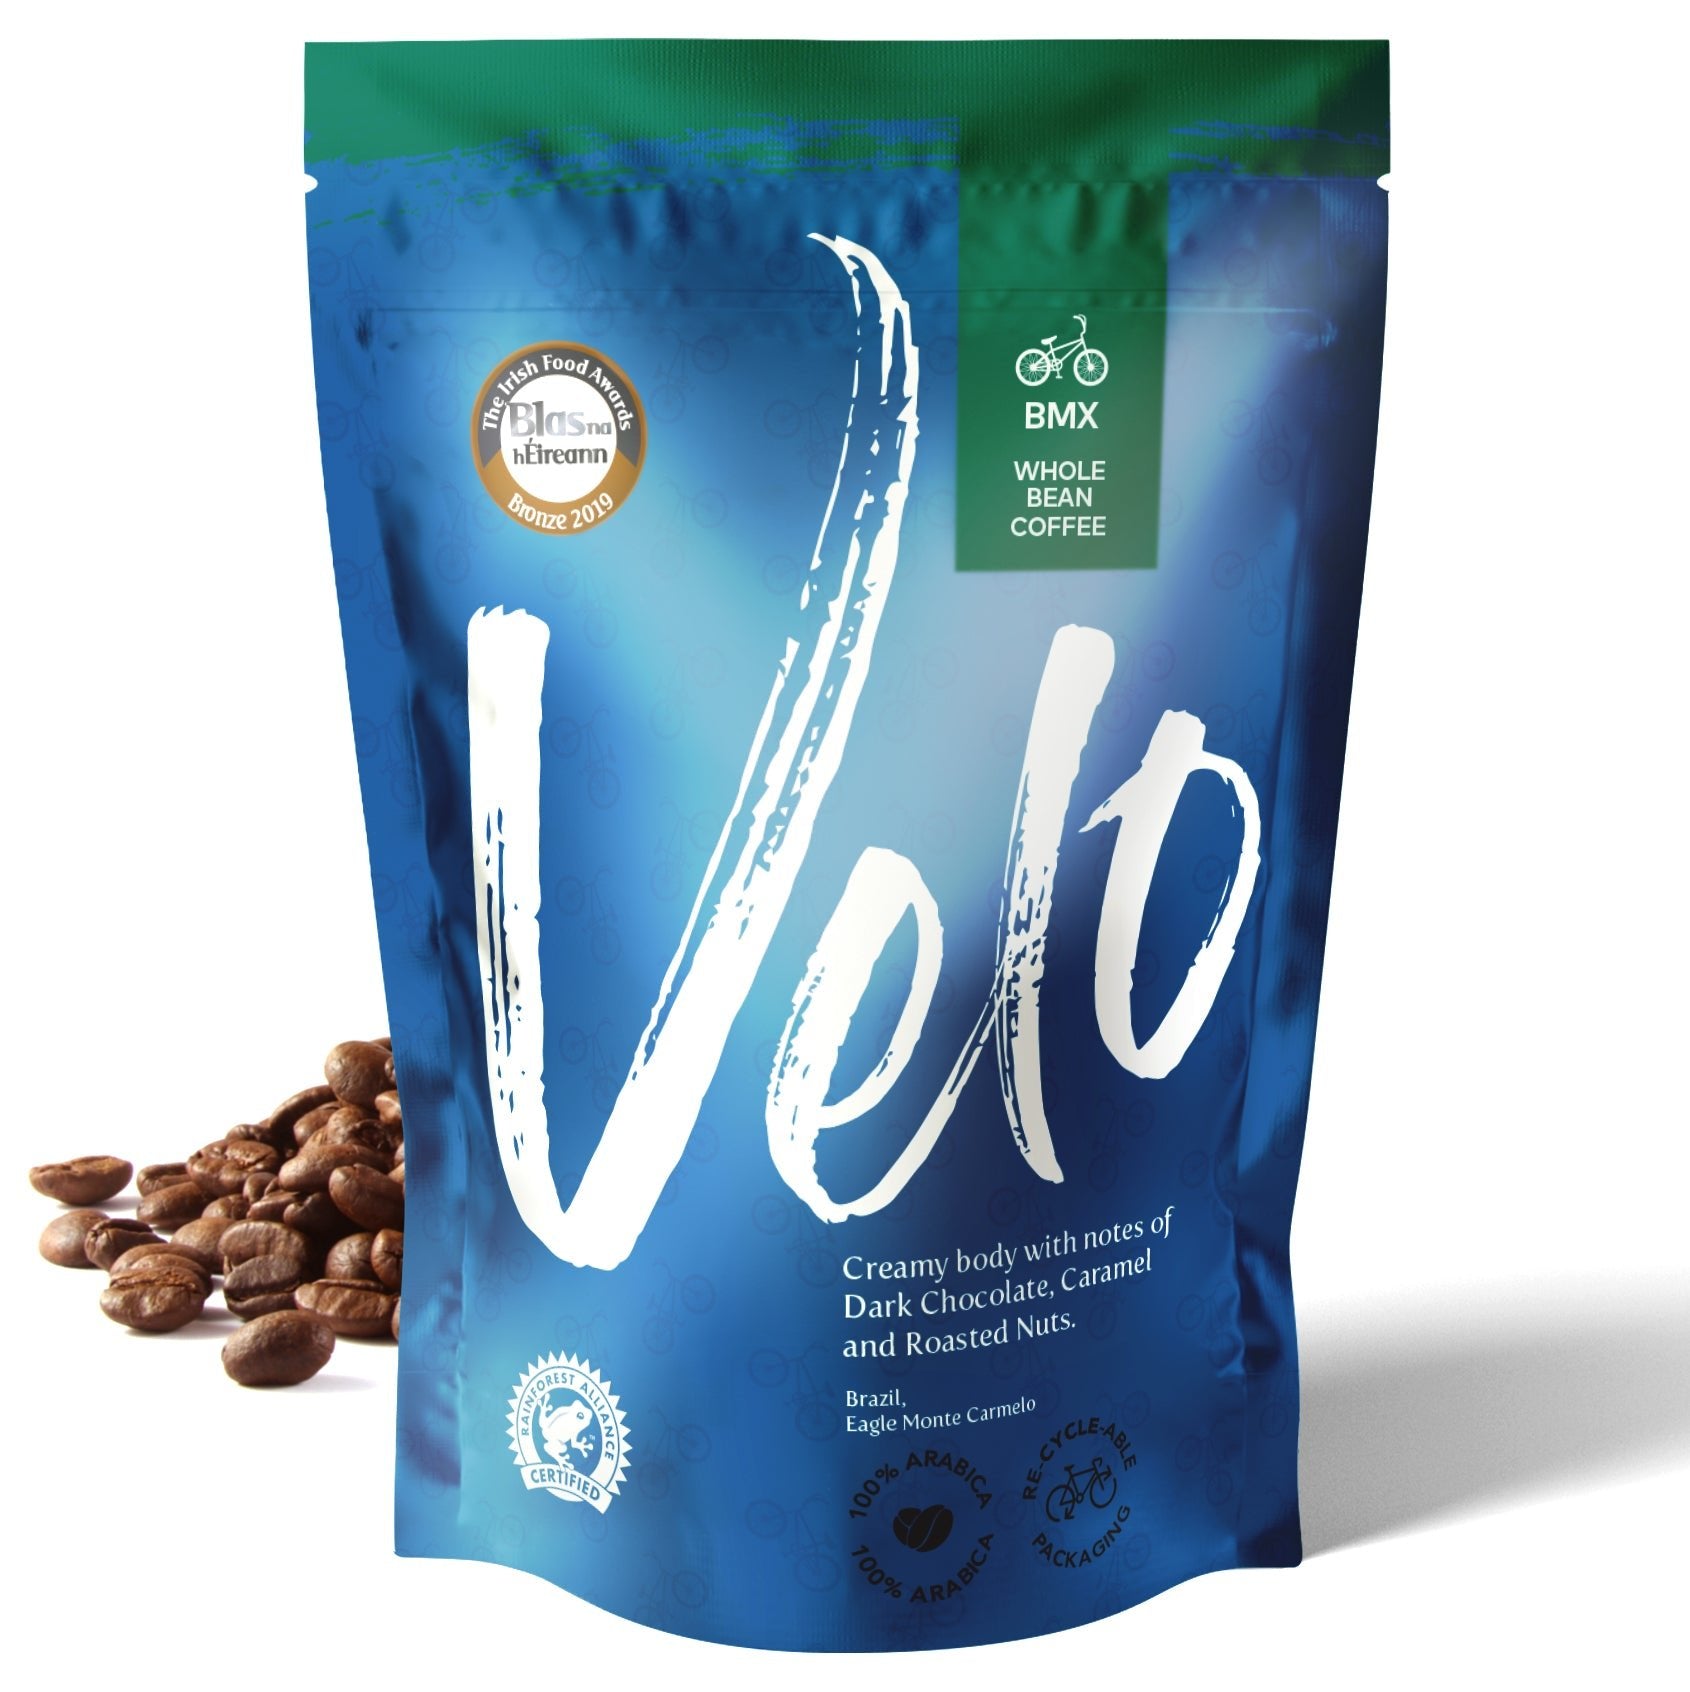 BMX 200g  Brazil Coffee - Blue and Green Coffee Bag with White Velo Across the  bag- Whole BEAN  Velo Coffee Roasters